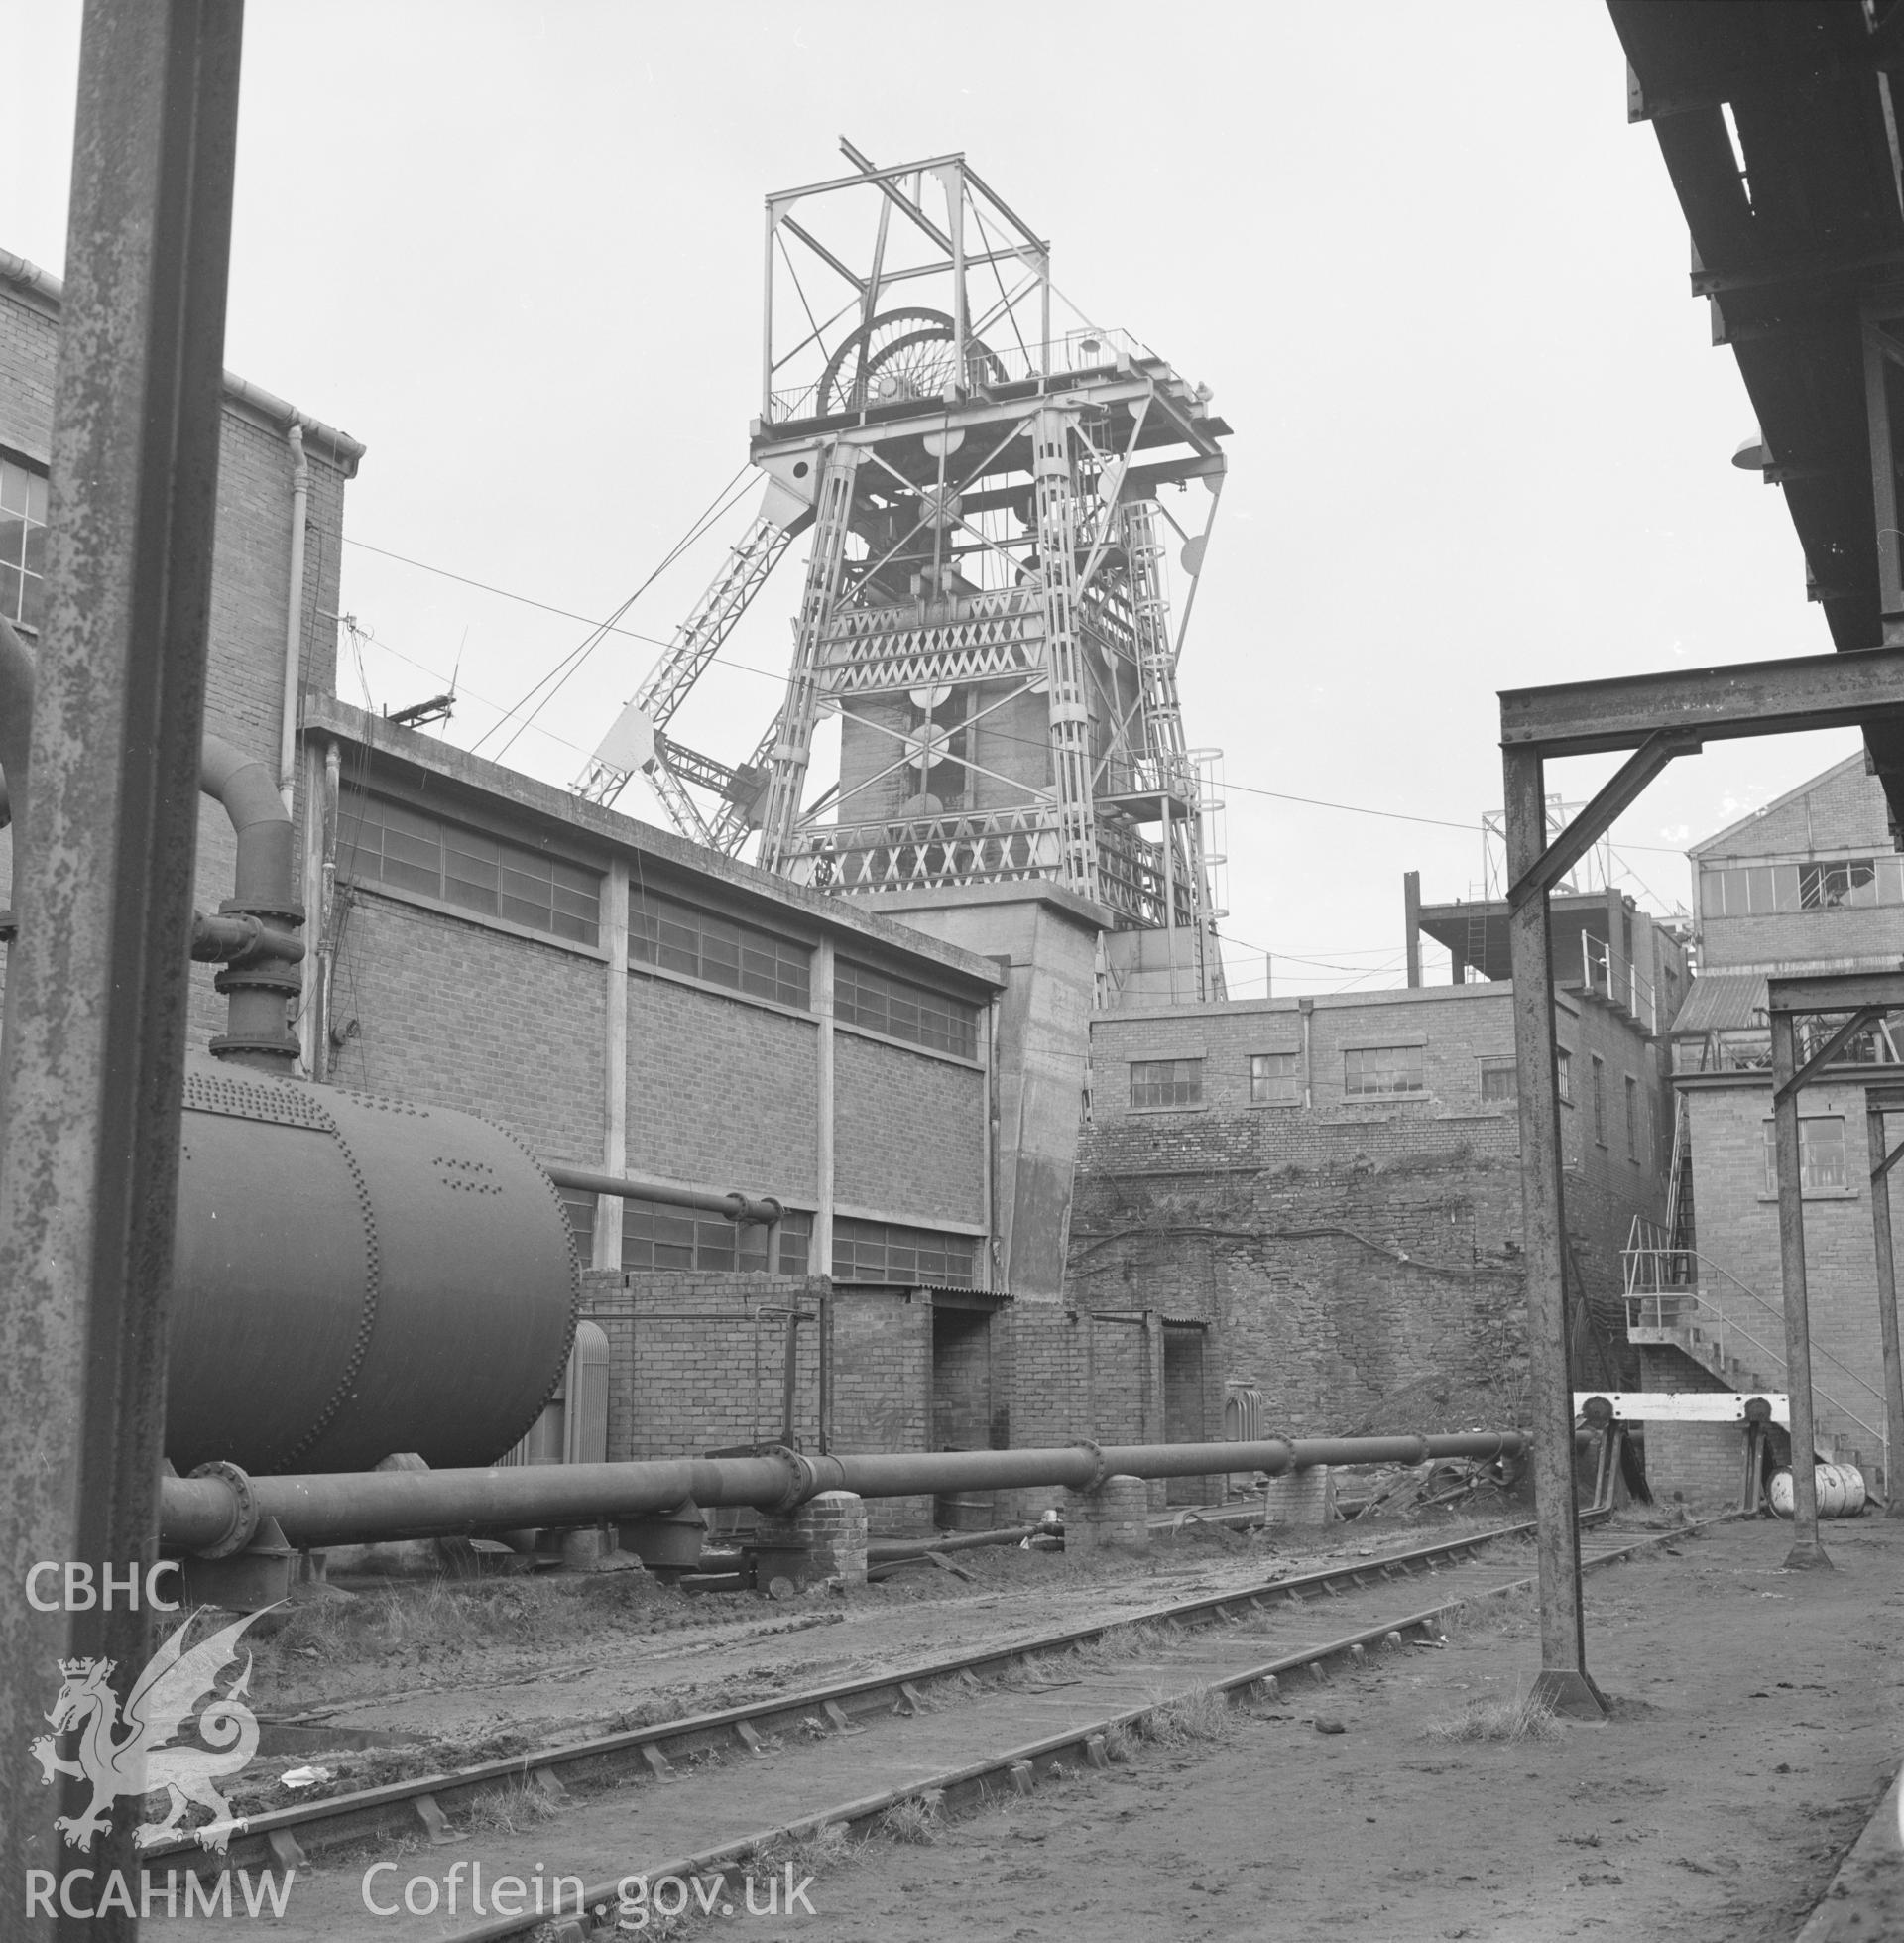 Digital copy of an acetate negative showing headframe at Taff Colliery, from the John Cornwell Collection.